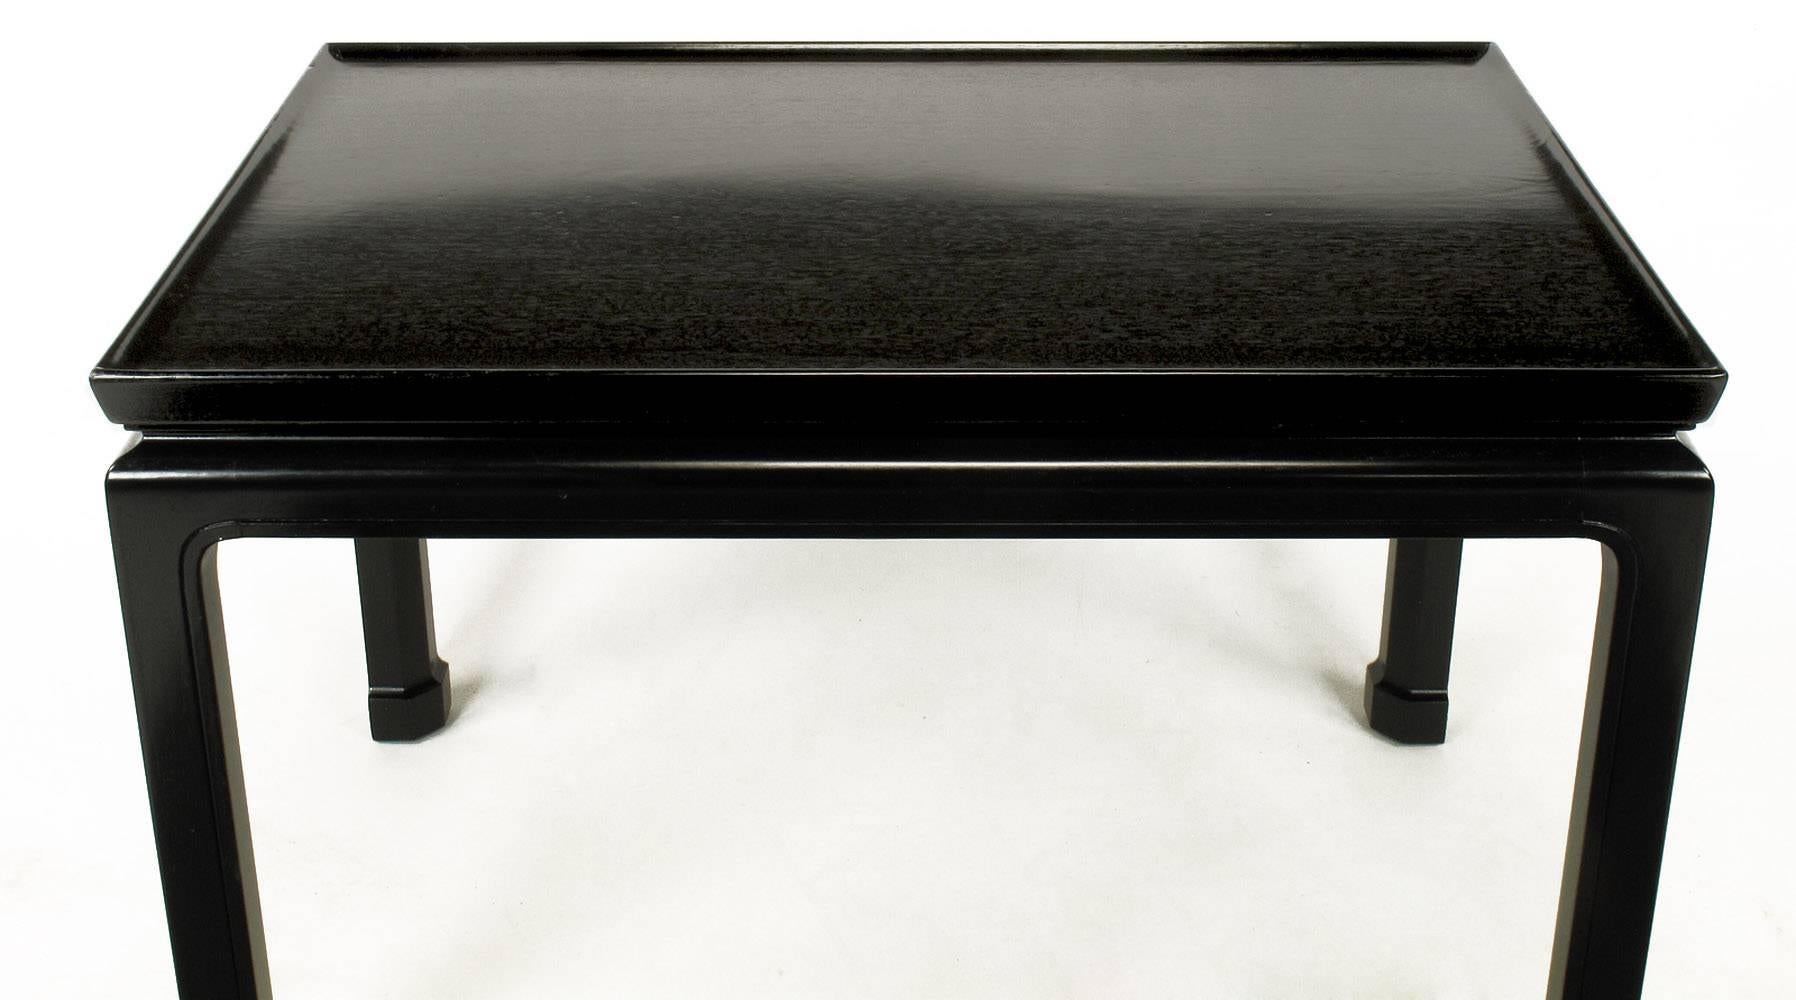 American Saybolt & Cleland Ebonized Ming-Style Turned-Edge Side Table For Sale